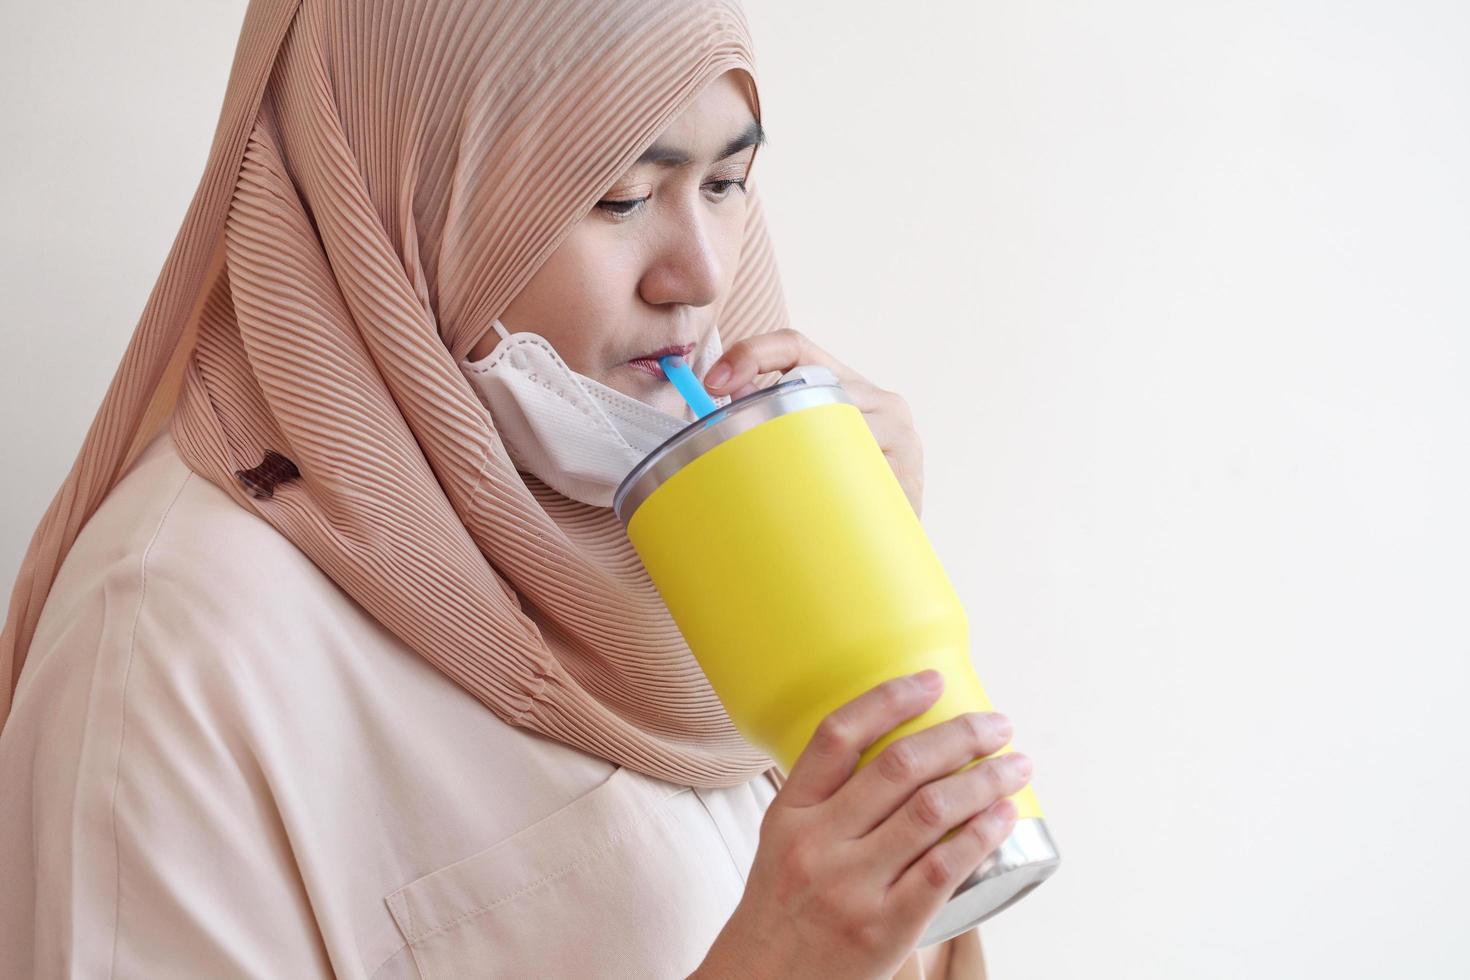 Muslim Girl open a surgical mask for drinking water on pastel background. Covid-19 coronavirus concept. photo